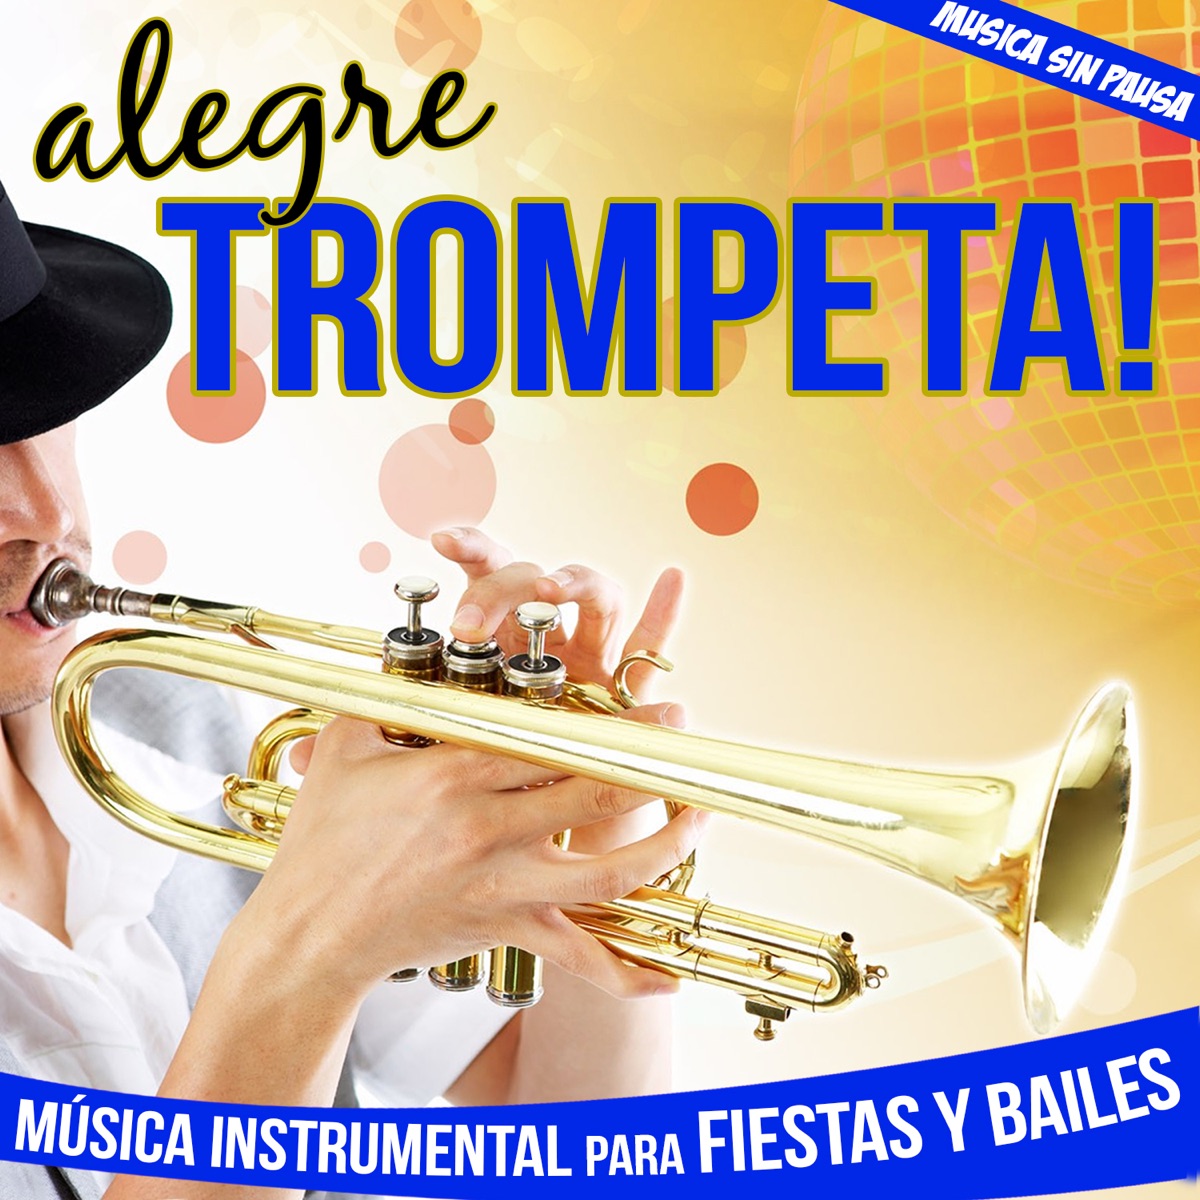 Happy Trumpet !. Instrumental Music for Party and Dance Non Stop by Pepe El  Trompeta on Apple Music